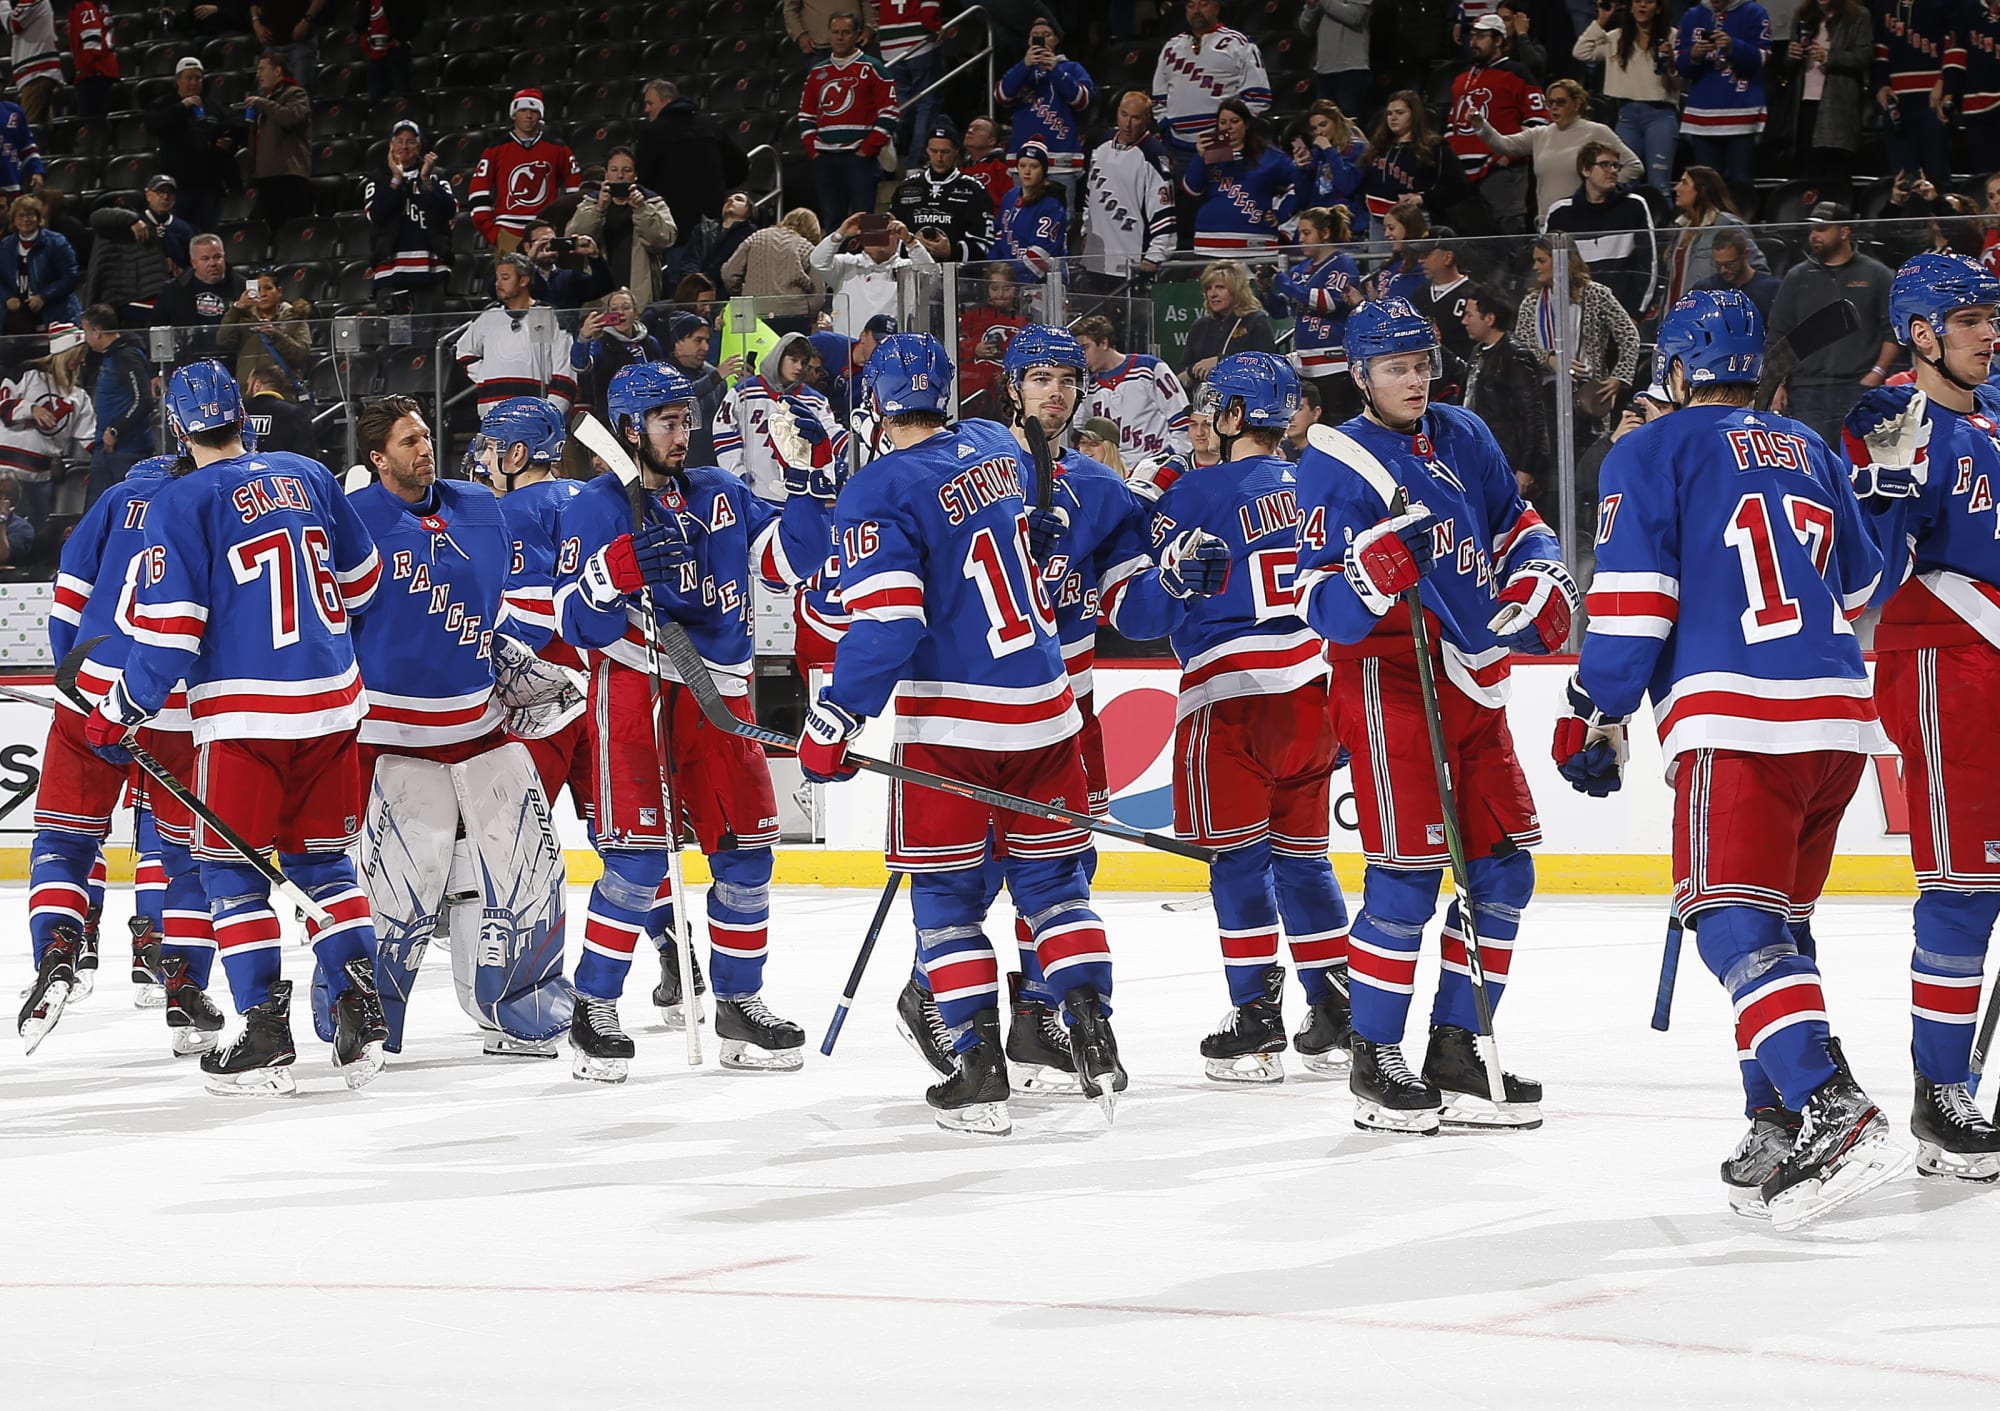 New York Rangers: Looking ahead at the December schedule